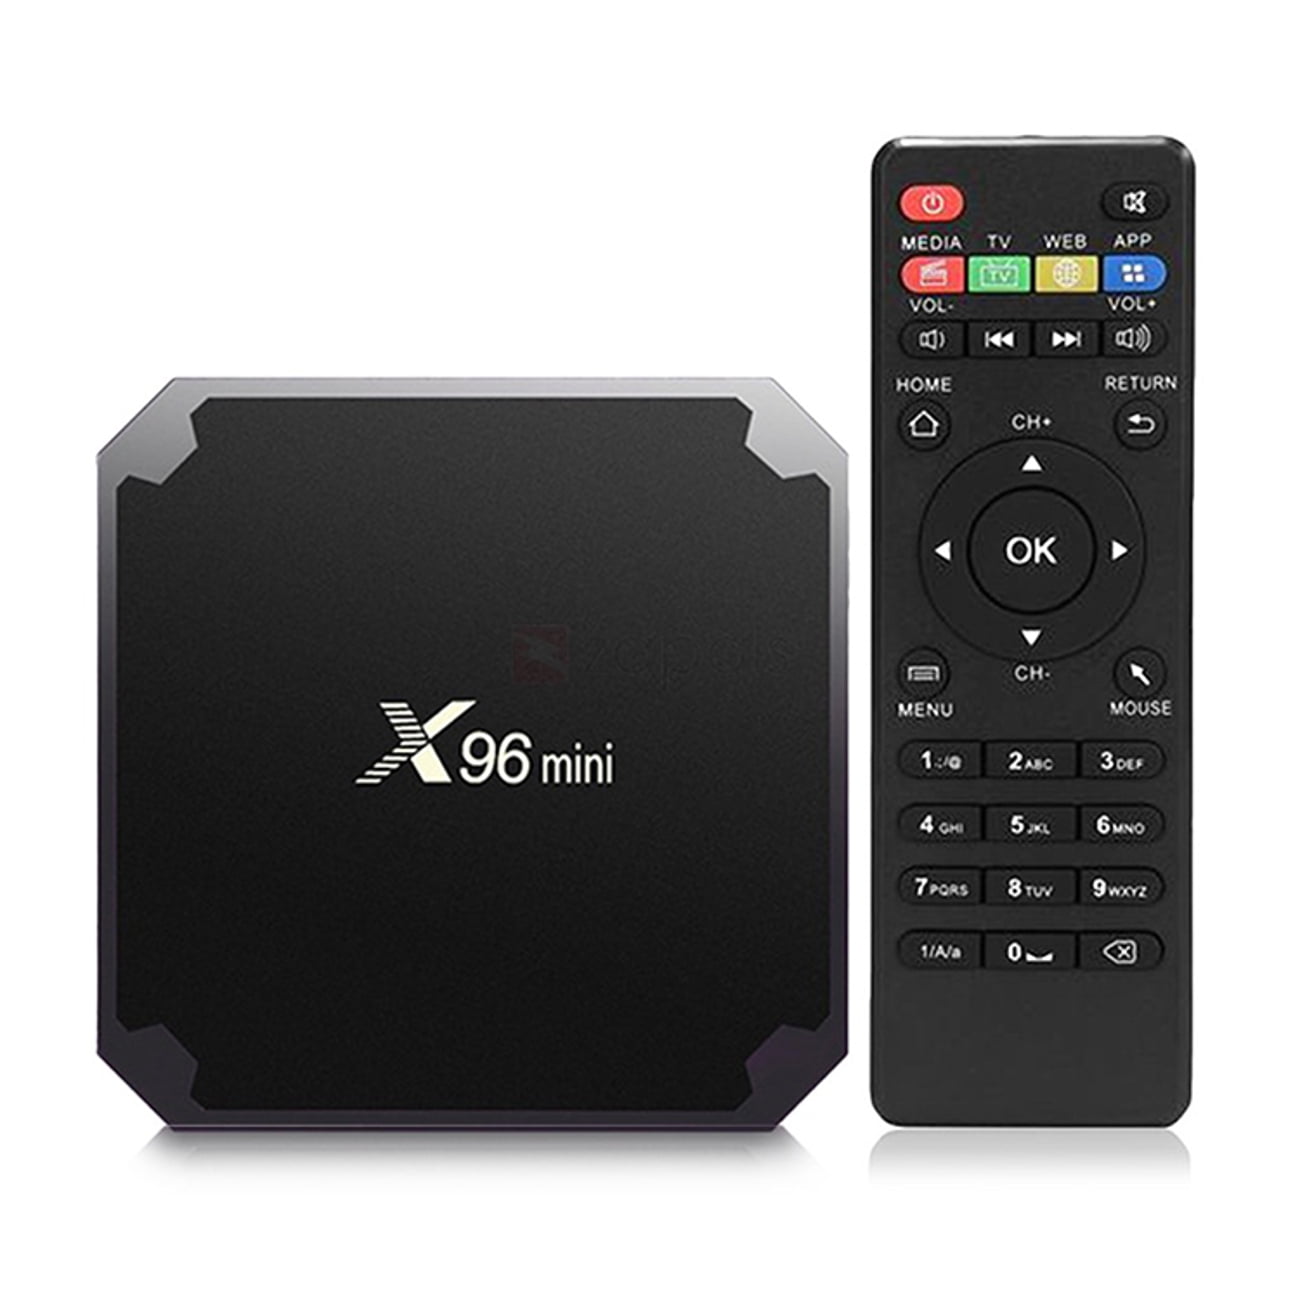 Support 2.4G WiFi 100M Ethernet 3D/4K HD HDR H.265 Android Box X96 Mini Android 9.0 TV Box Amlogic S905W Quad Core 2GB RAM 16GB ROM 